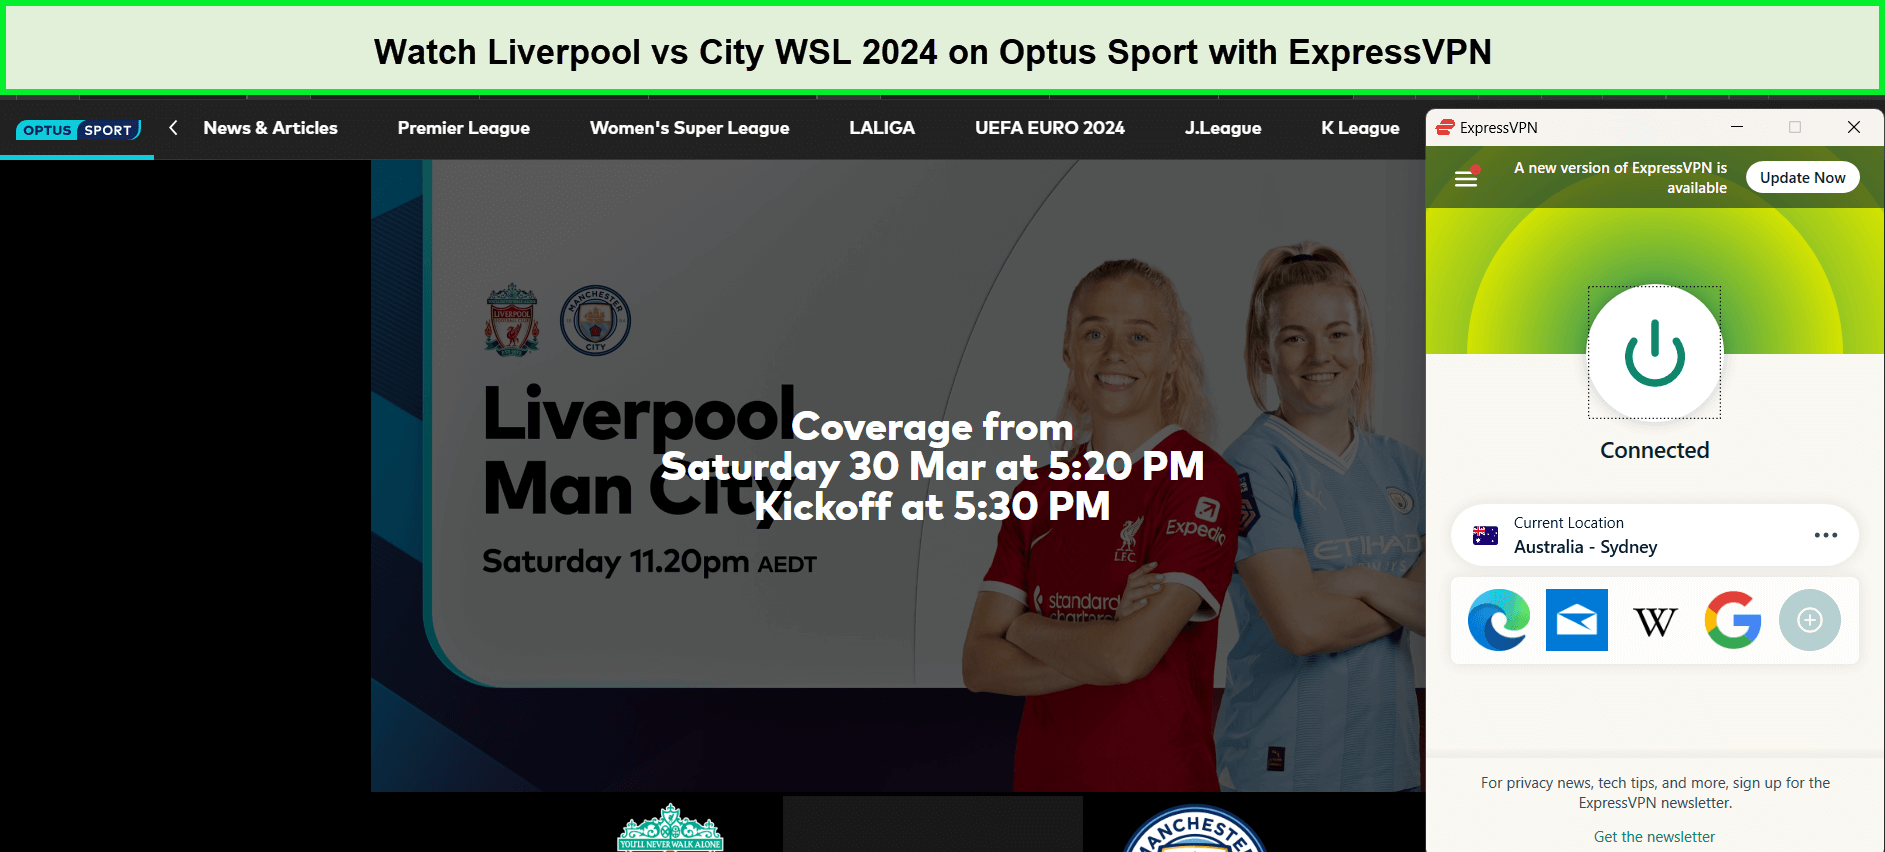 watch-Liverpool-vs-City-WSL-2024-in-New Zealand-on-Optus-Sport-with-expressvpn